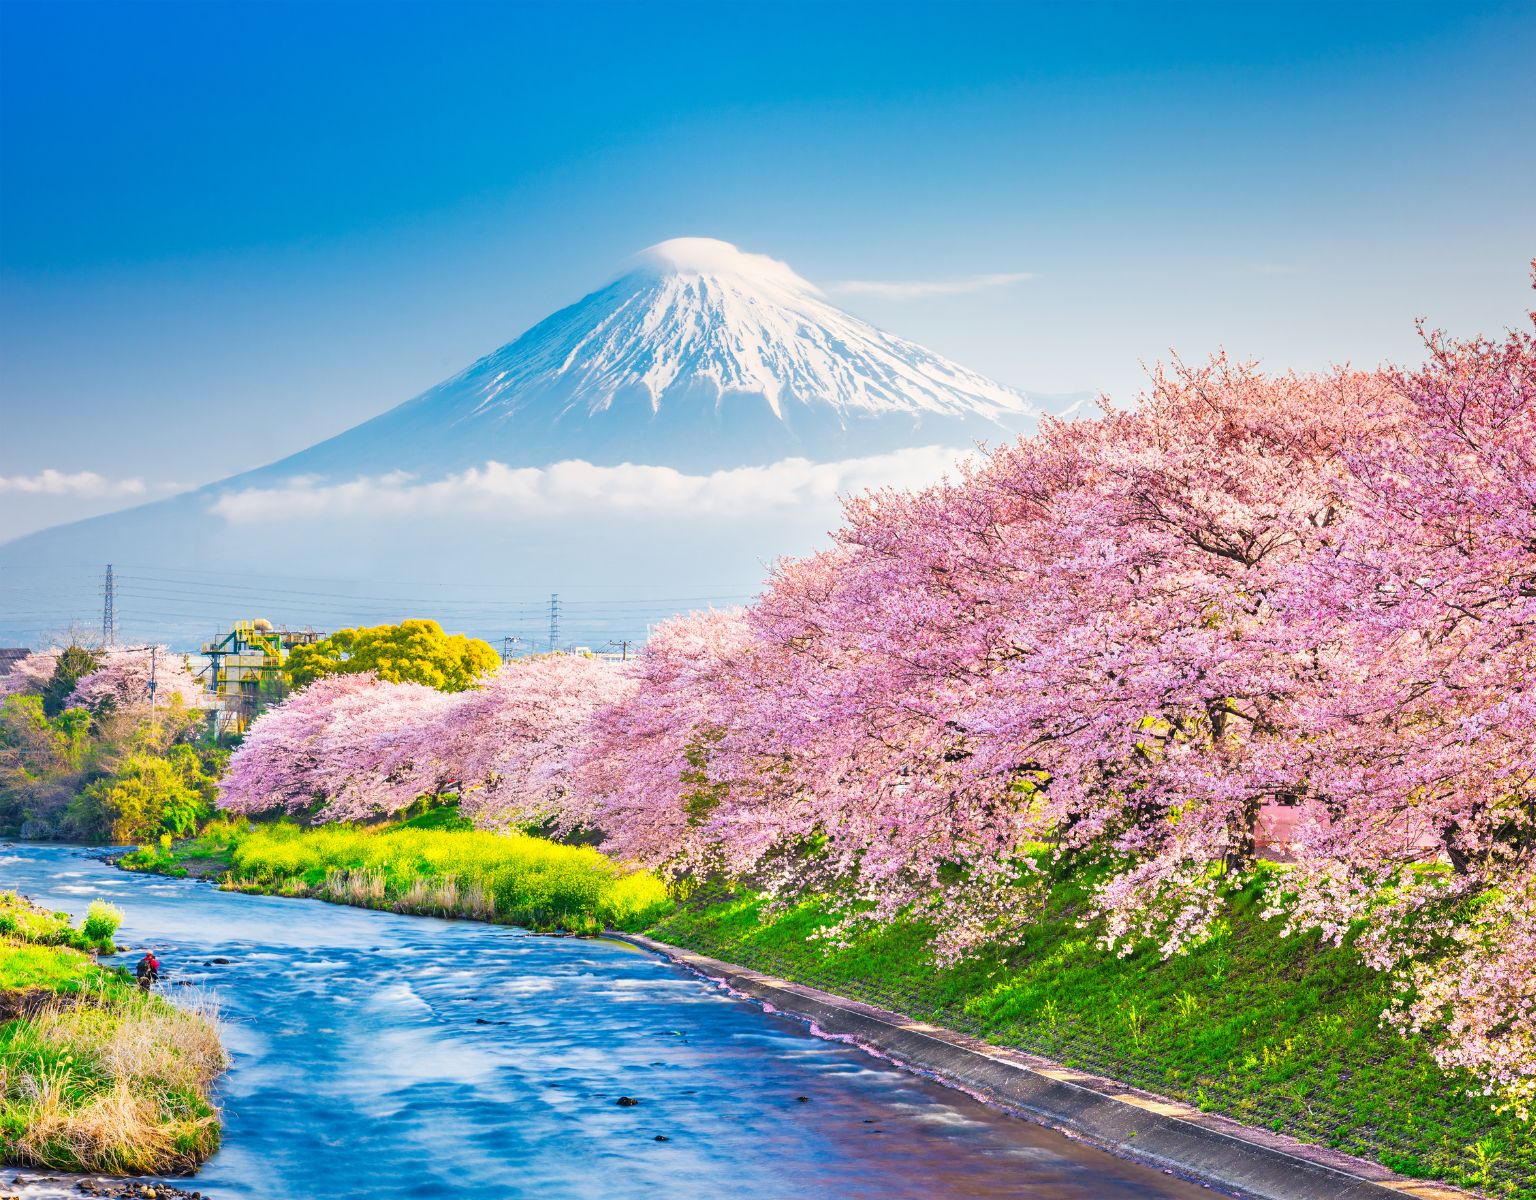 Race Across the World with Journey through Japan